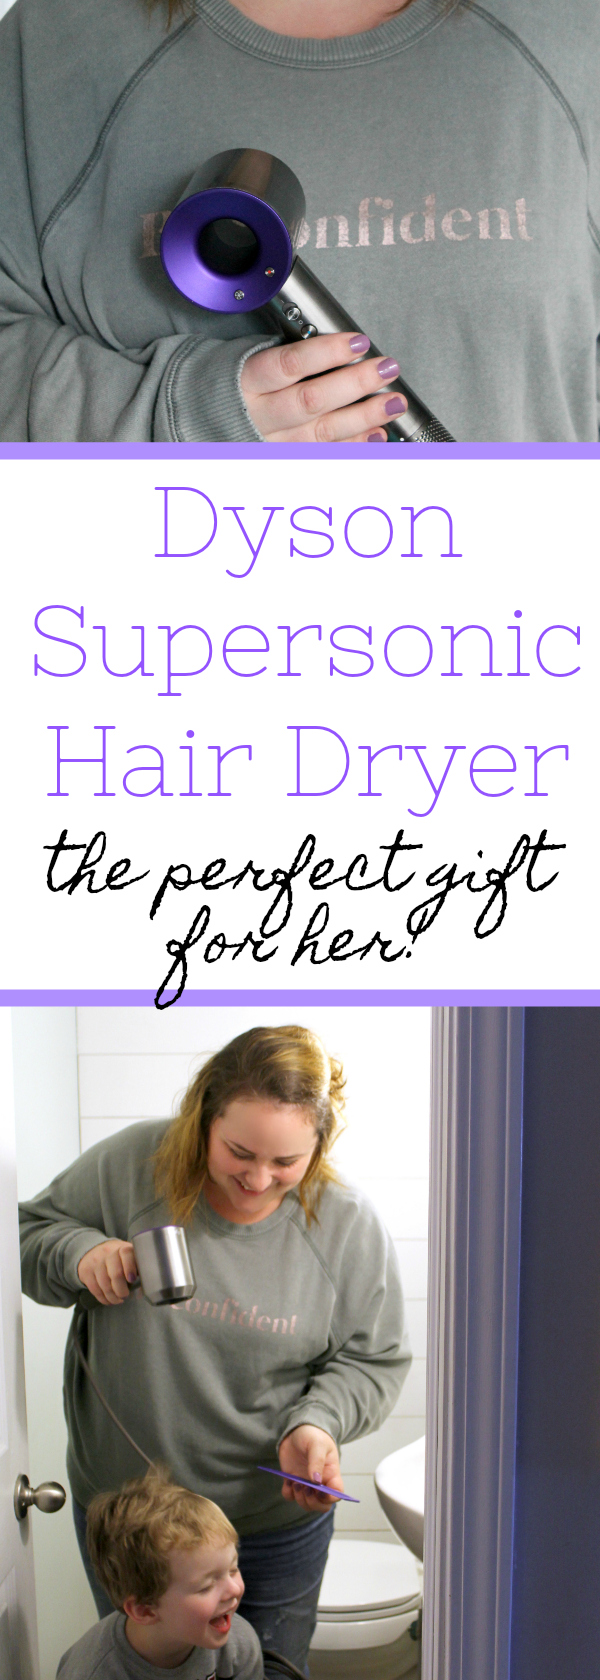 Dyson Supersonic Hair Dryer